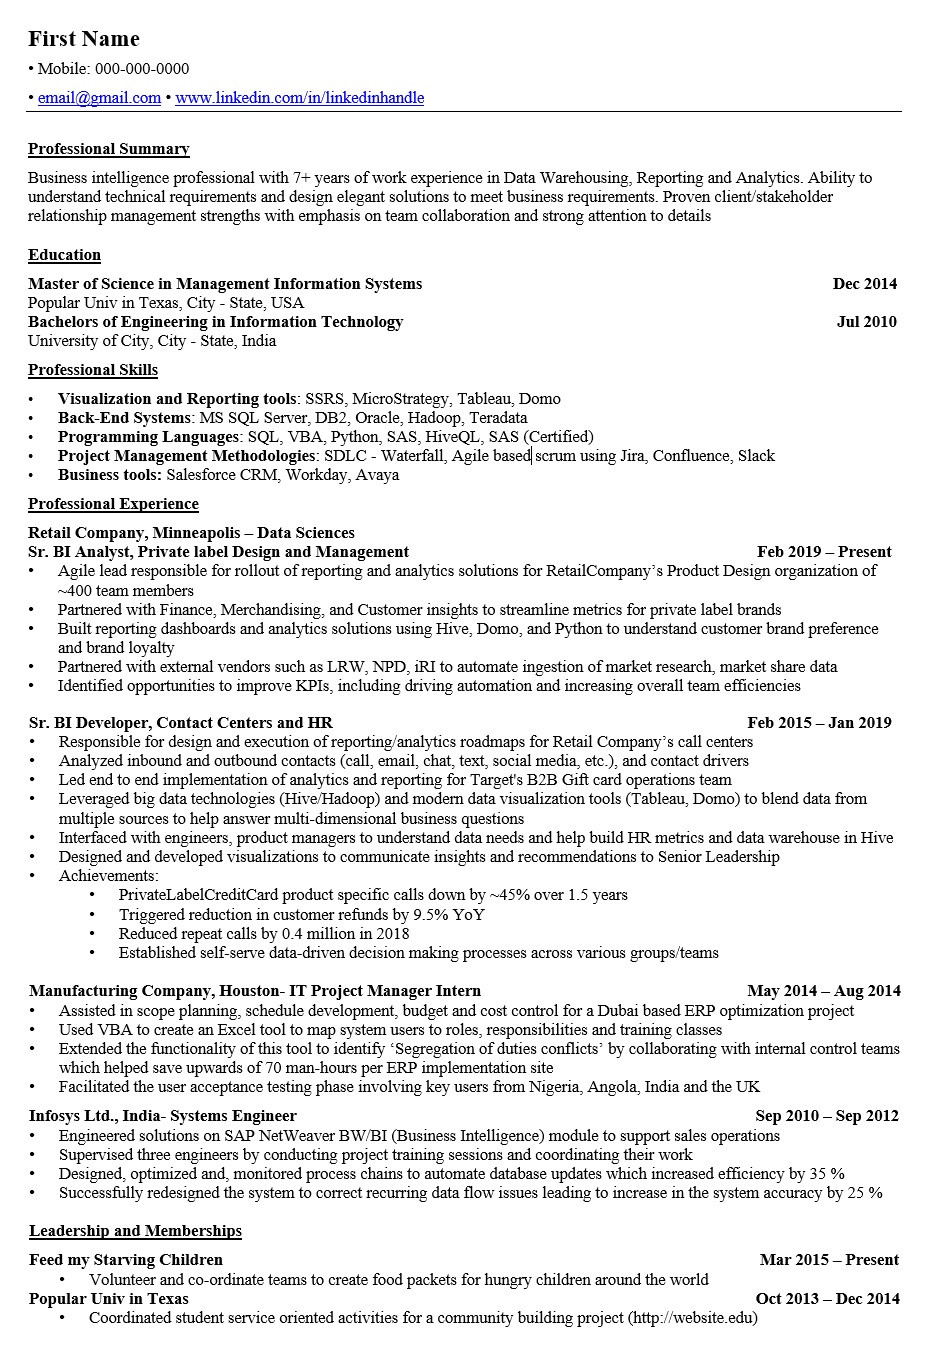 Feed My Starving Children Volunteer Resume Sample Business Intelligence Professional Looking for Resume Advice : R …